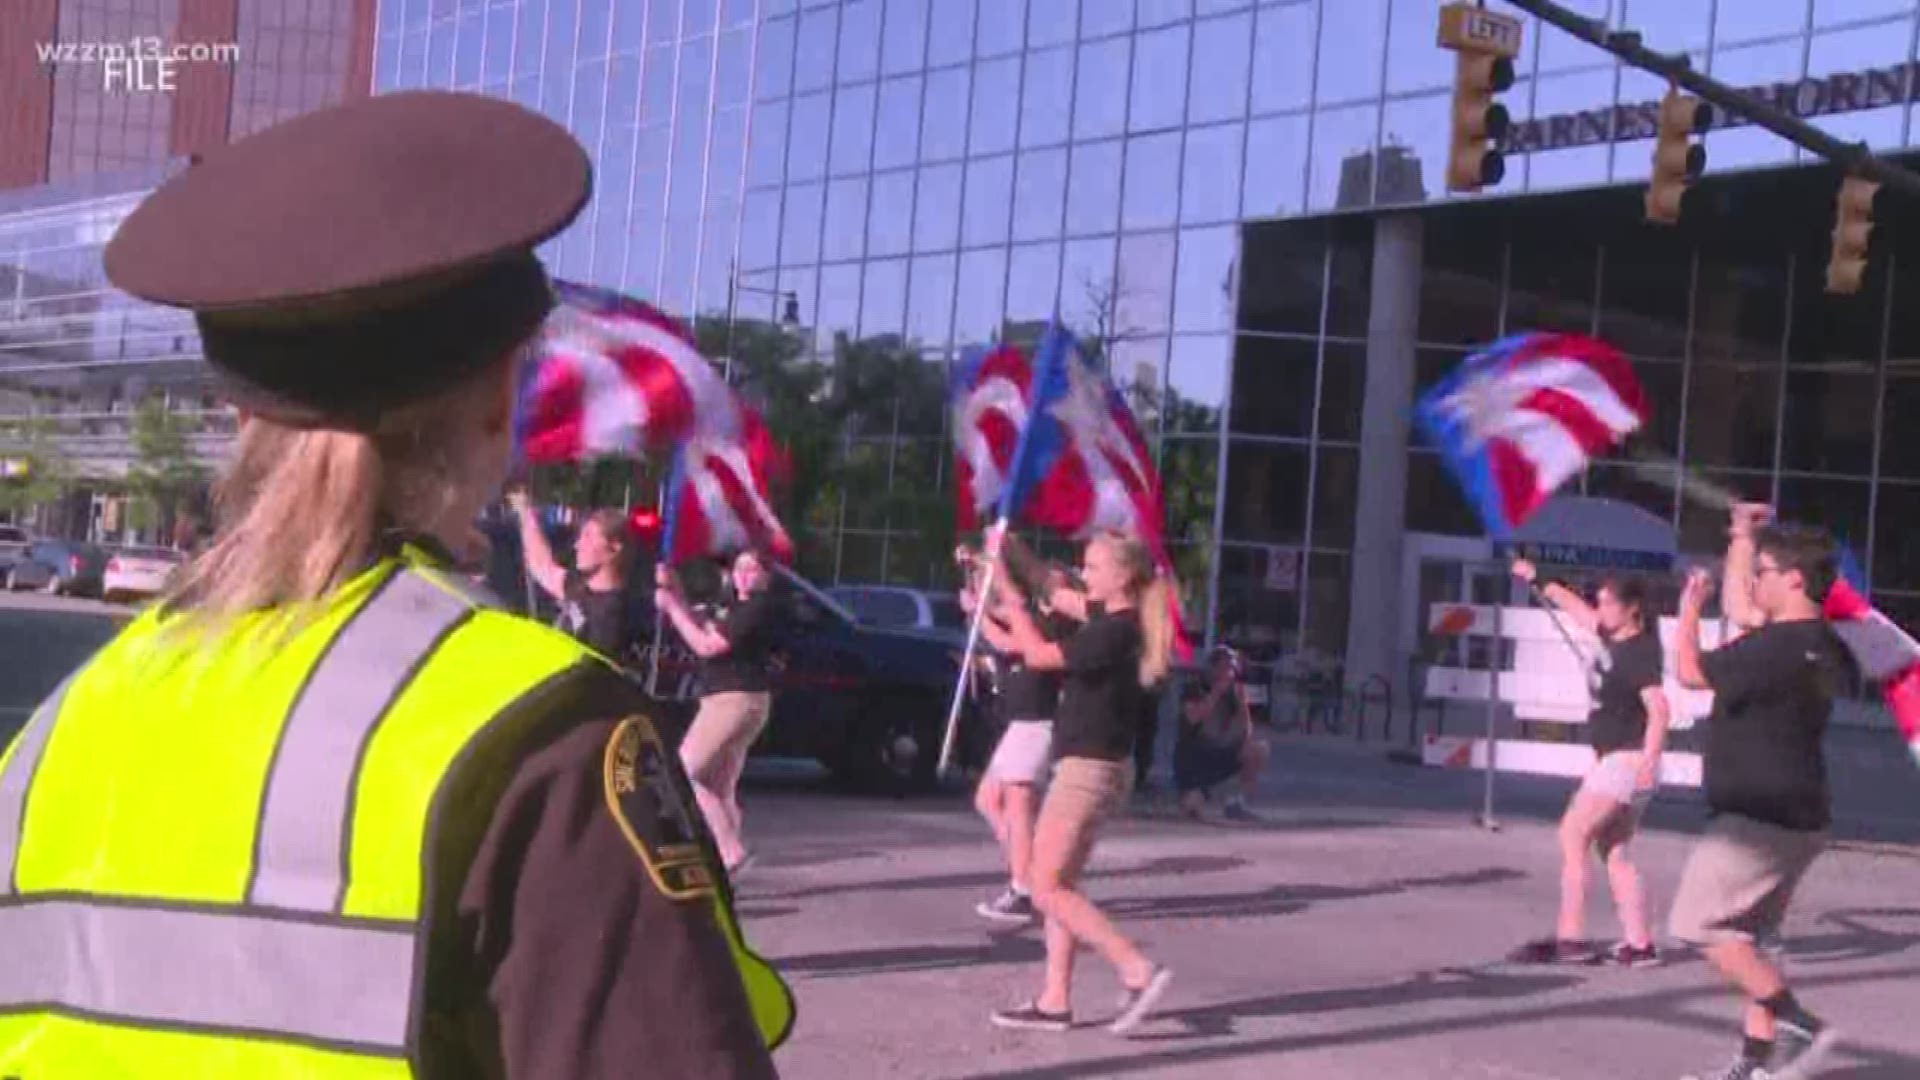 Wyoming, Grand Rapids holding Memorial Day parades